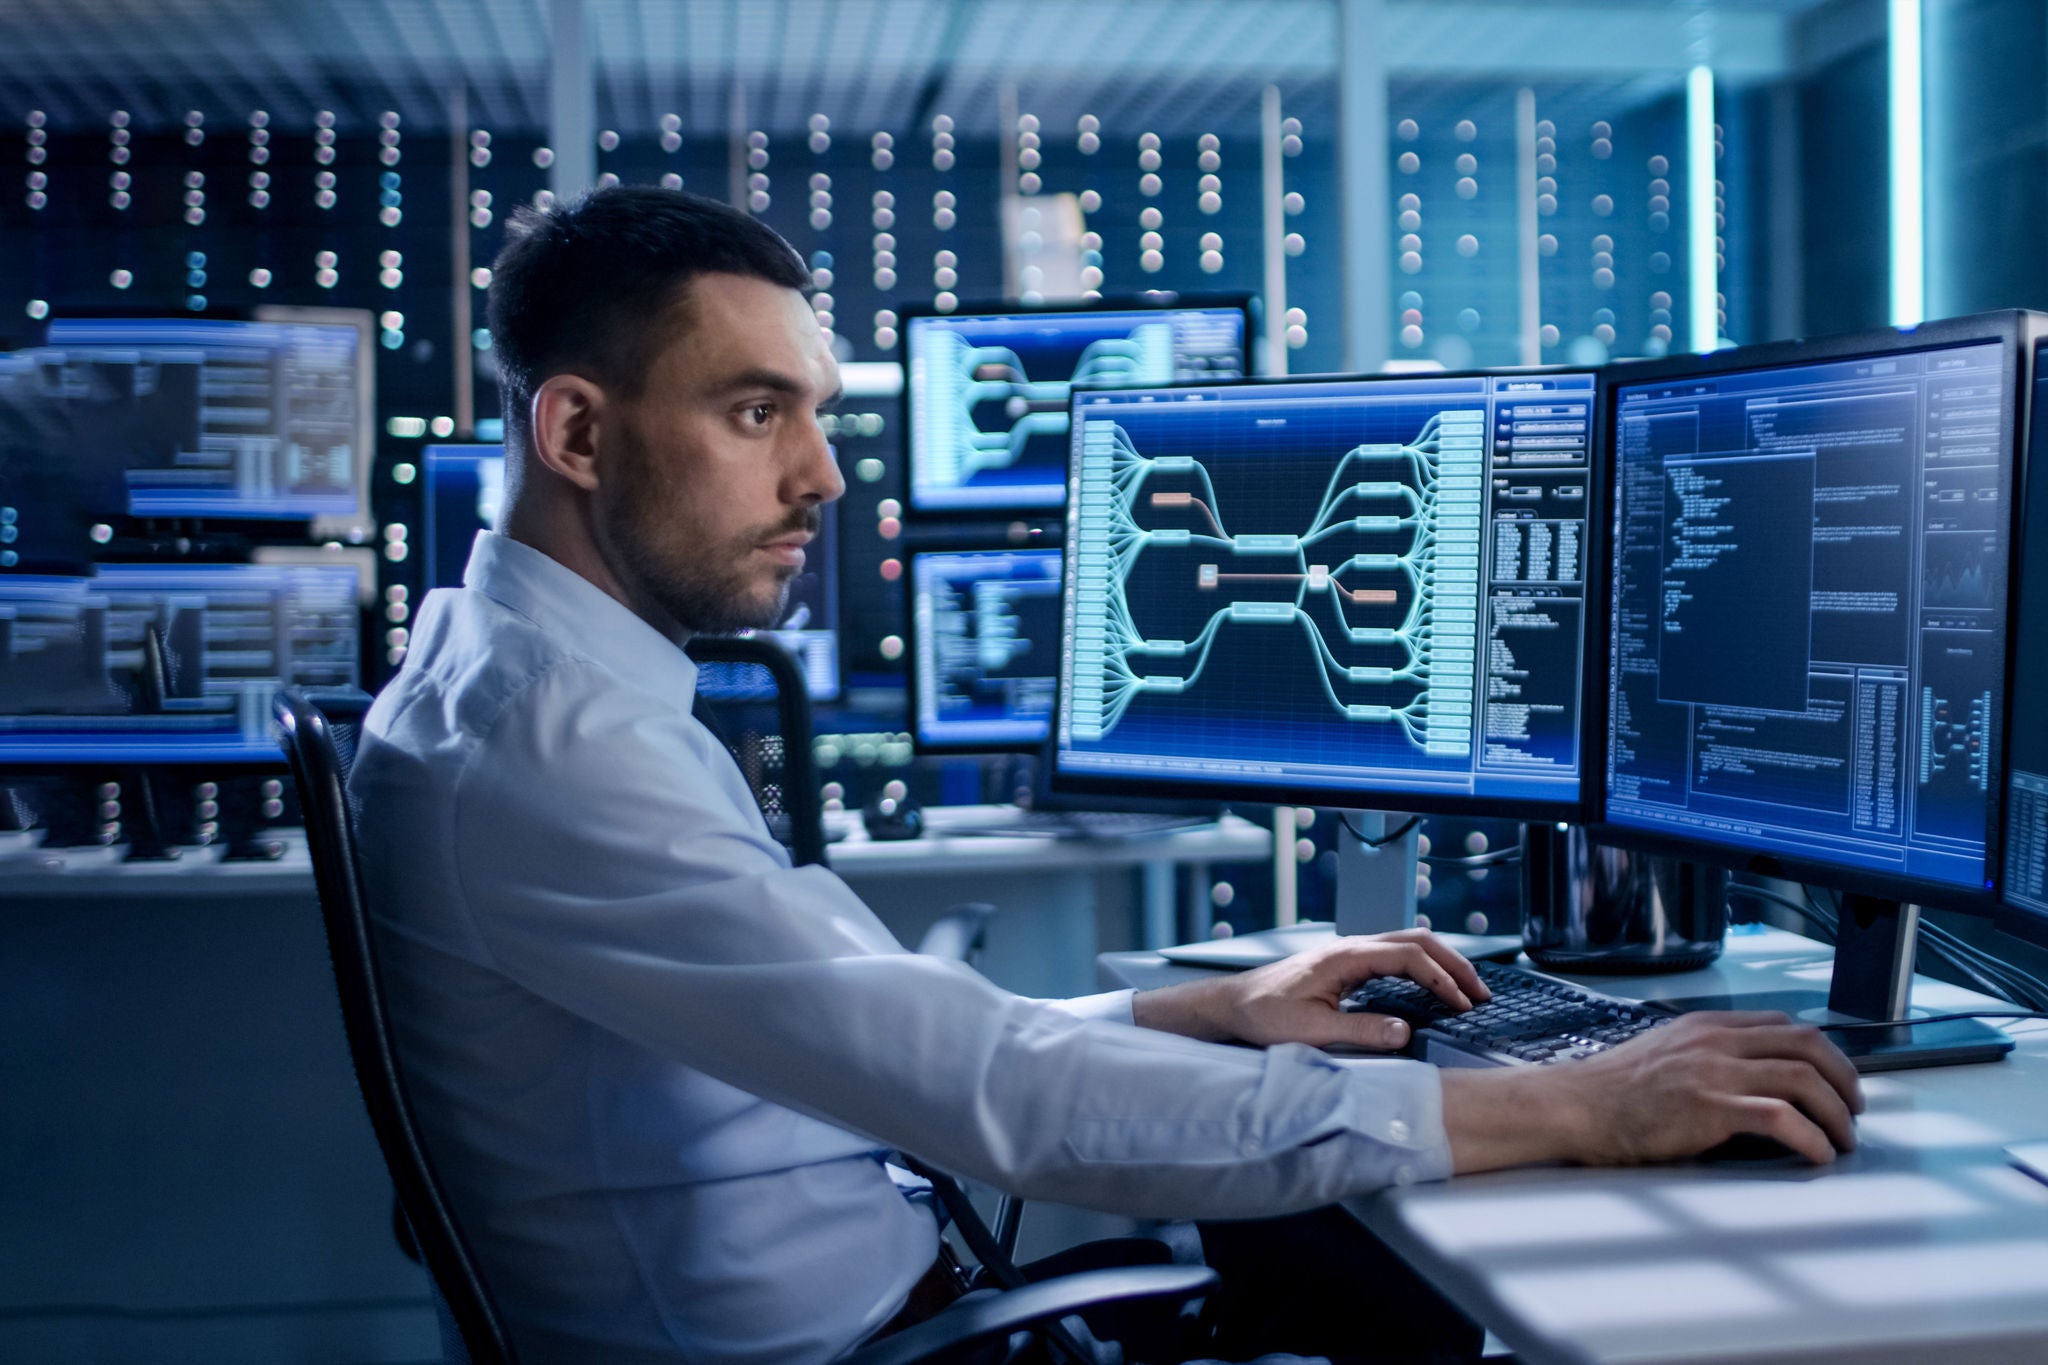 System Security Specialist Working at System Control Center